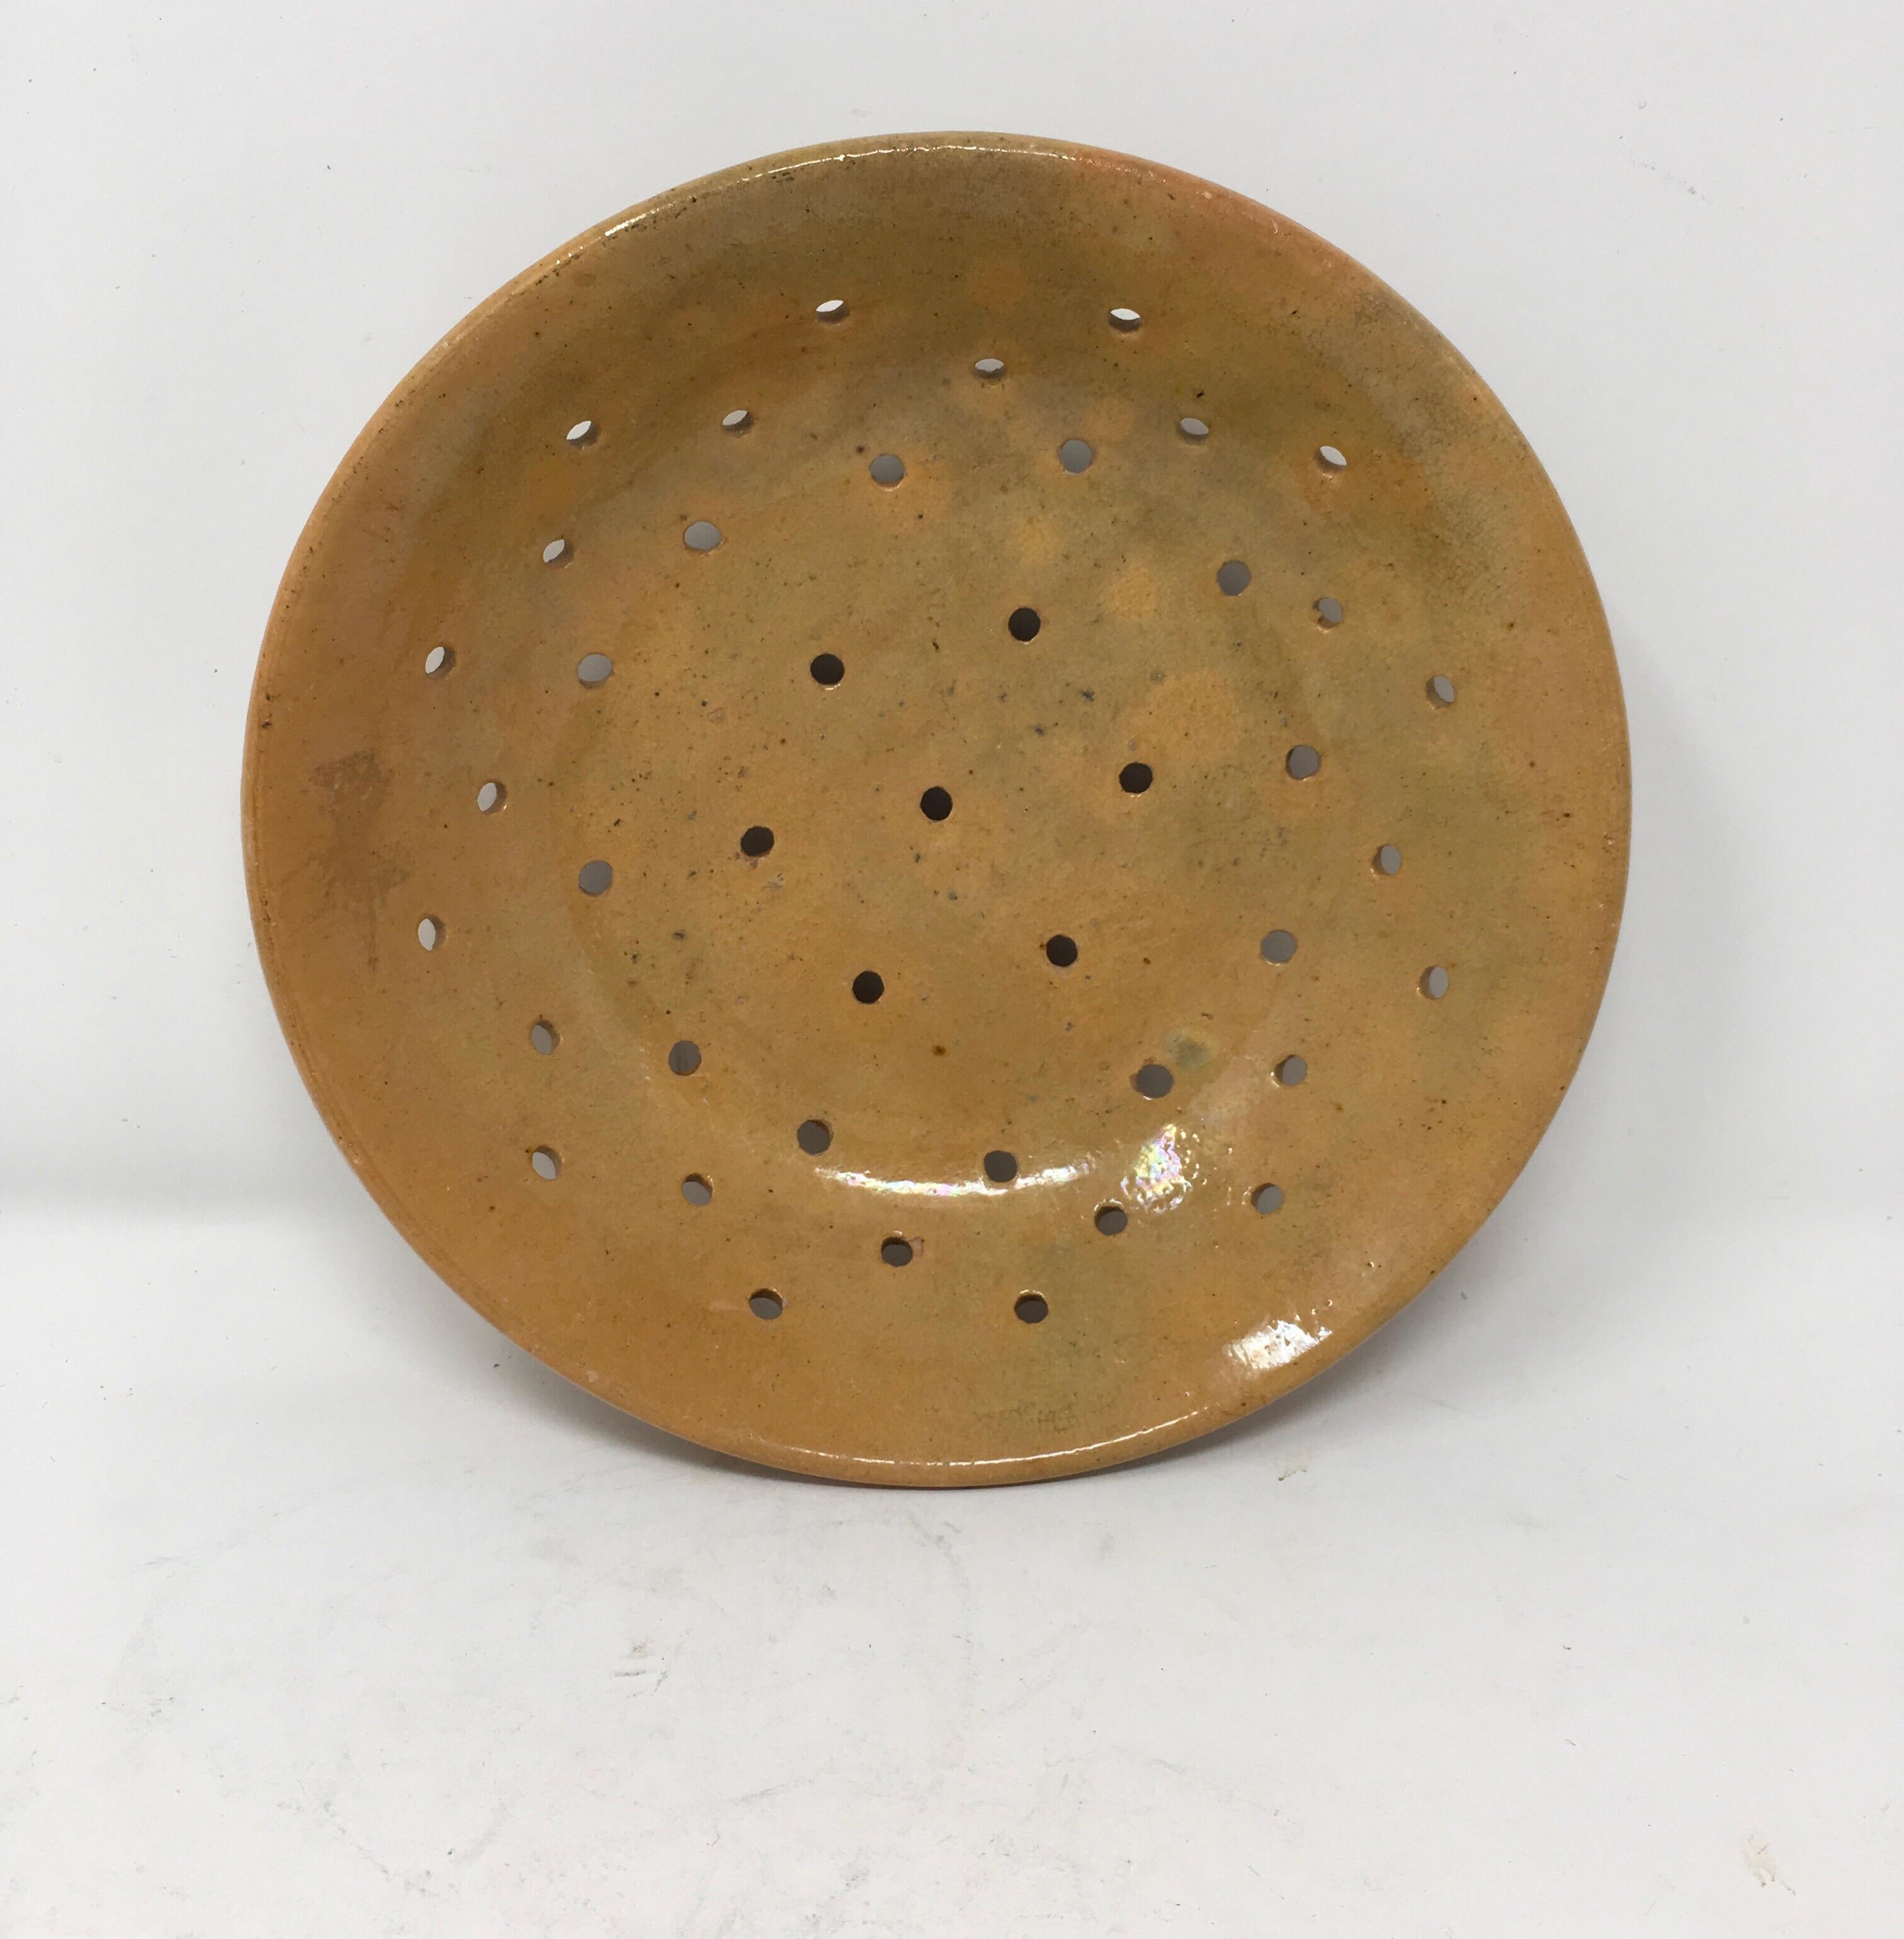 Found in the South of France, this handmade antique French 'Faisselle' cheese mold is constructed in a glazed pottery. Faisselle or 'framage frais' (fresh goat cheese) was made by curdling unpasteurized milk and then straining it. This mold has been